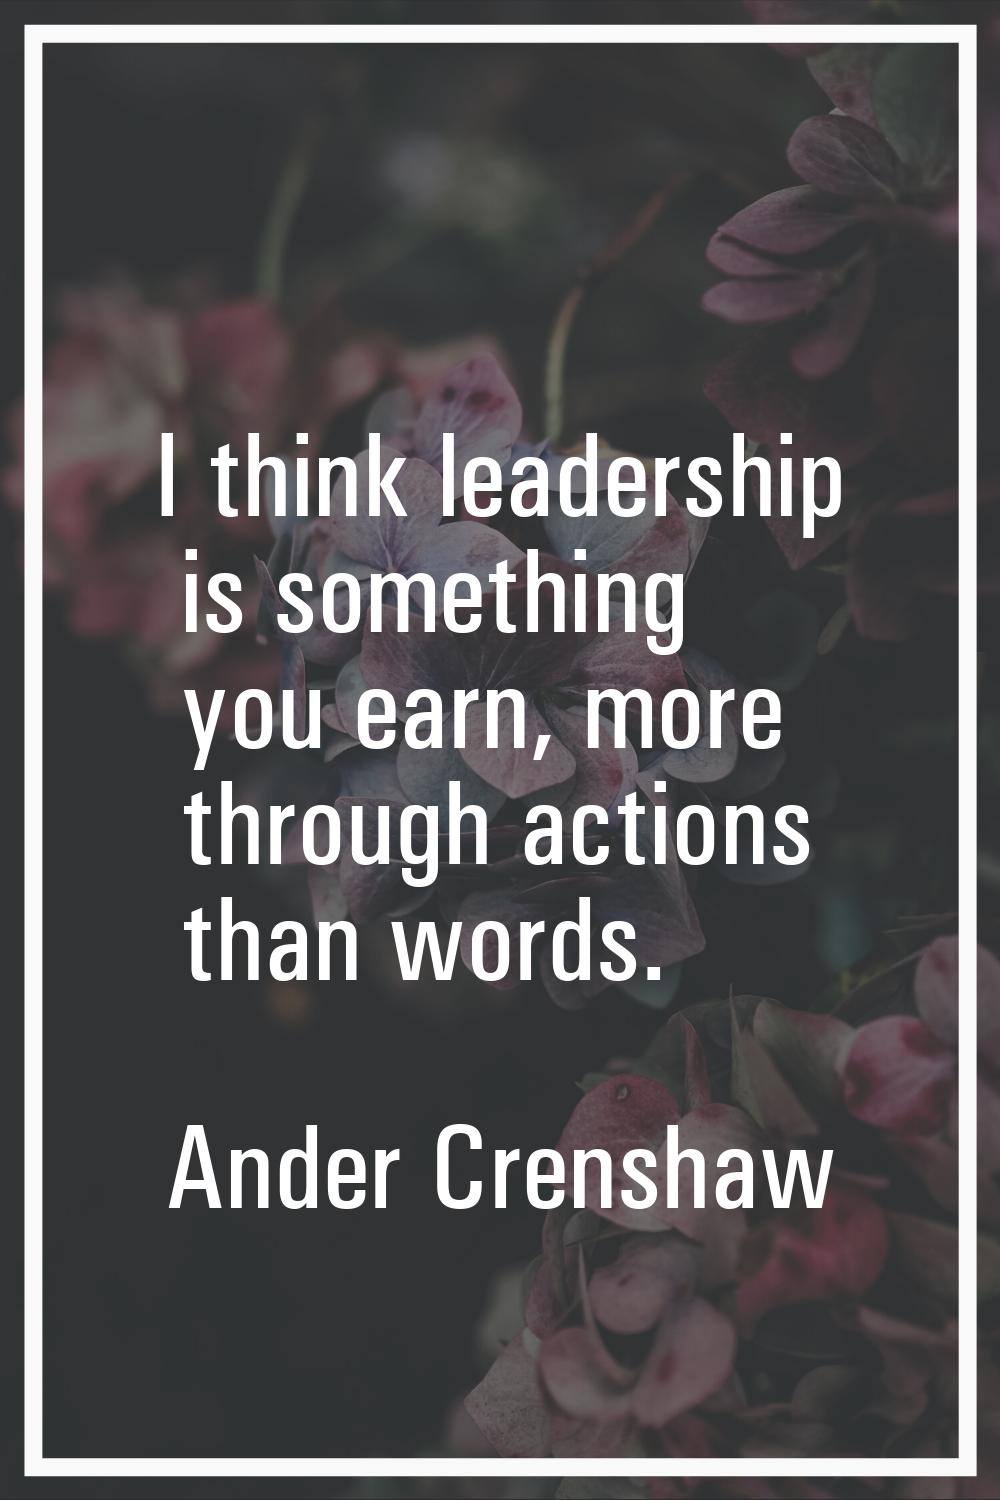 I think leadership is something you earn, more through actions than words.